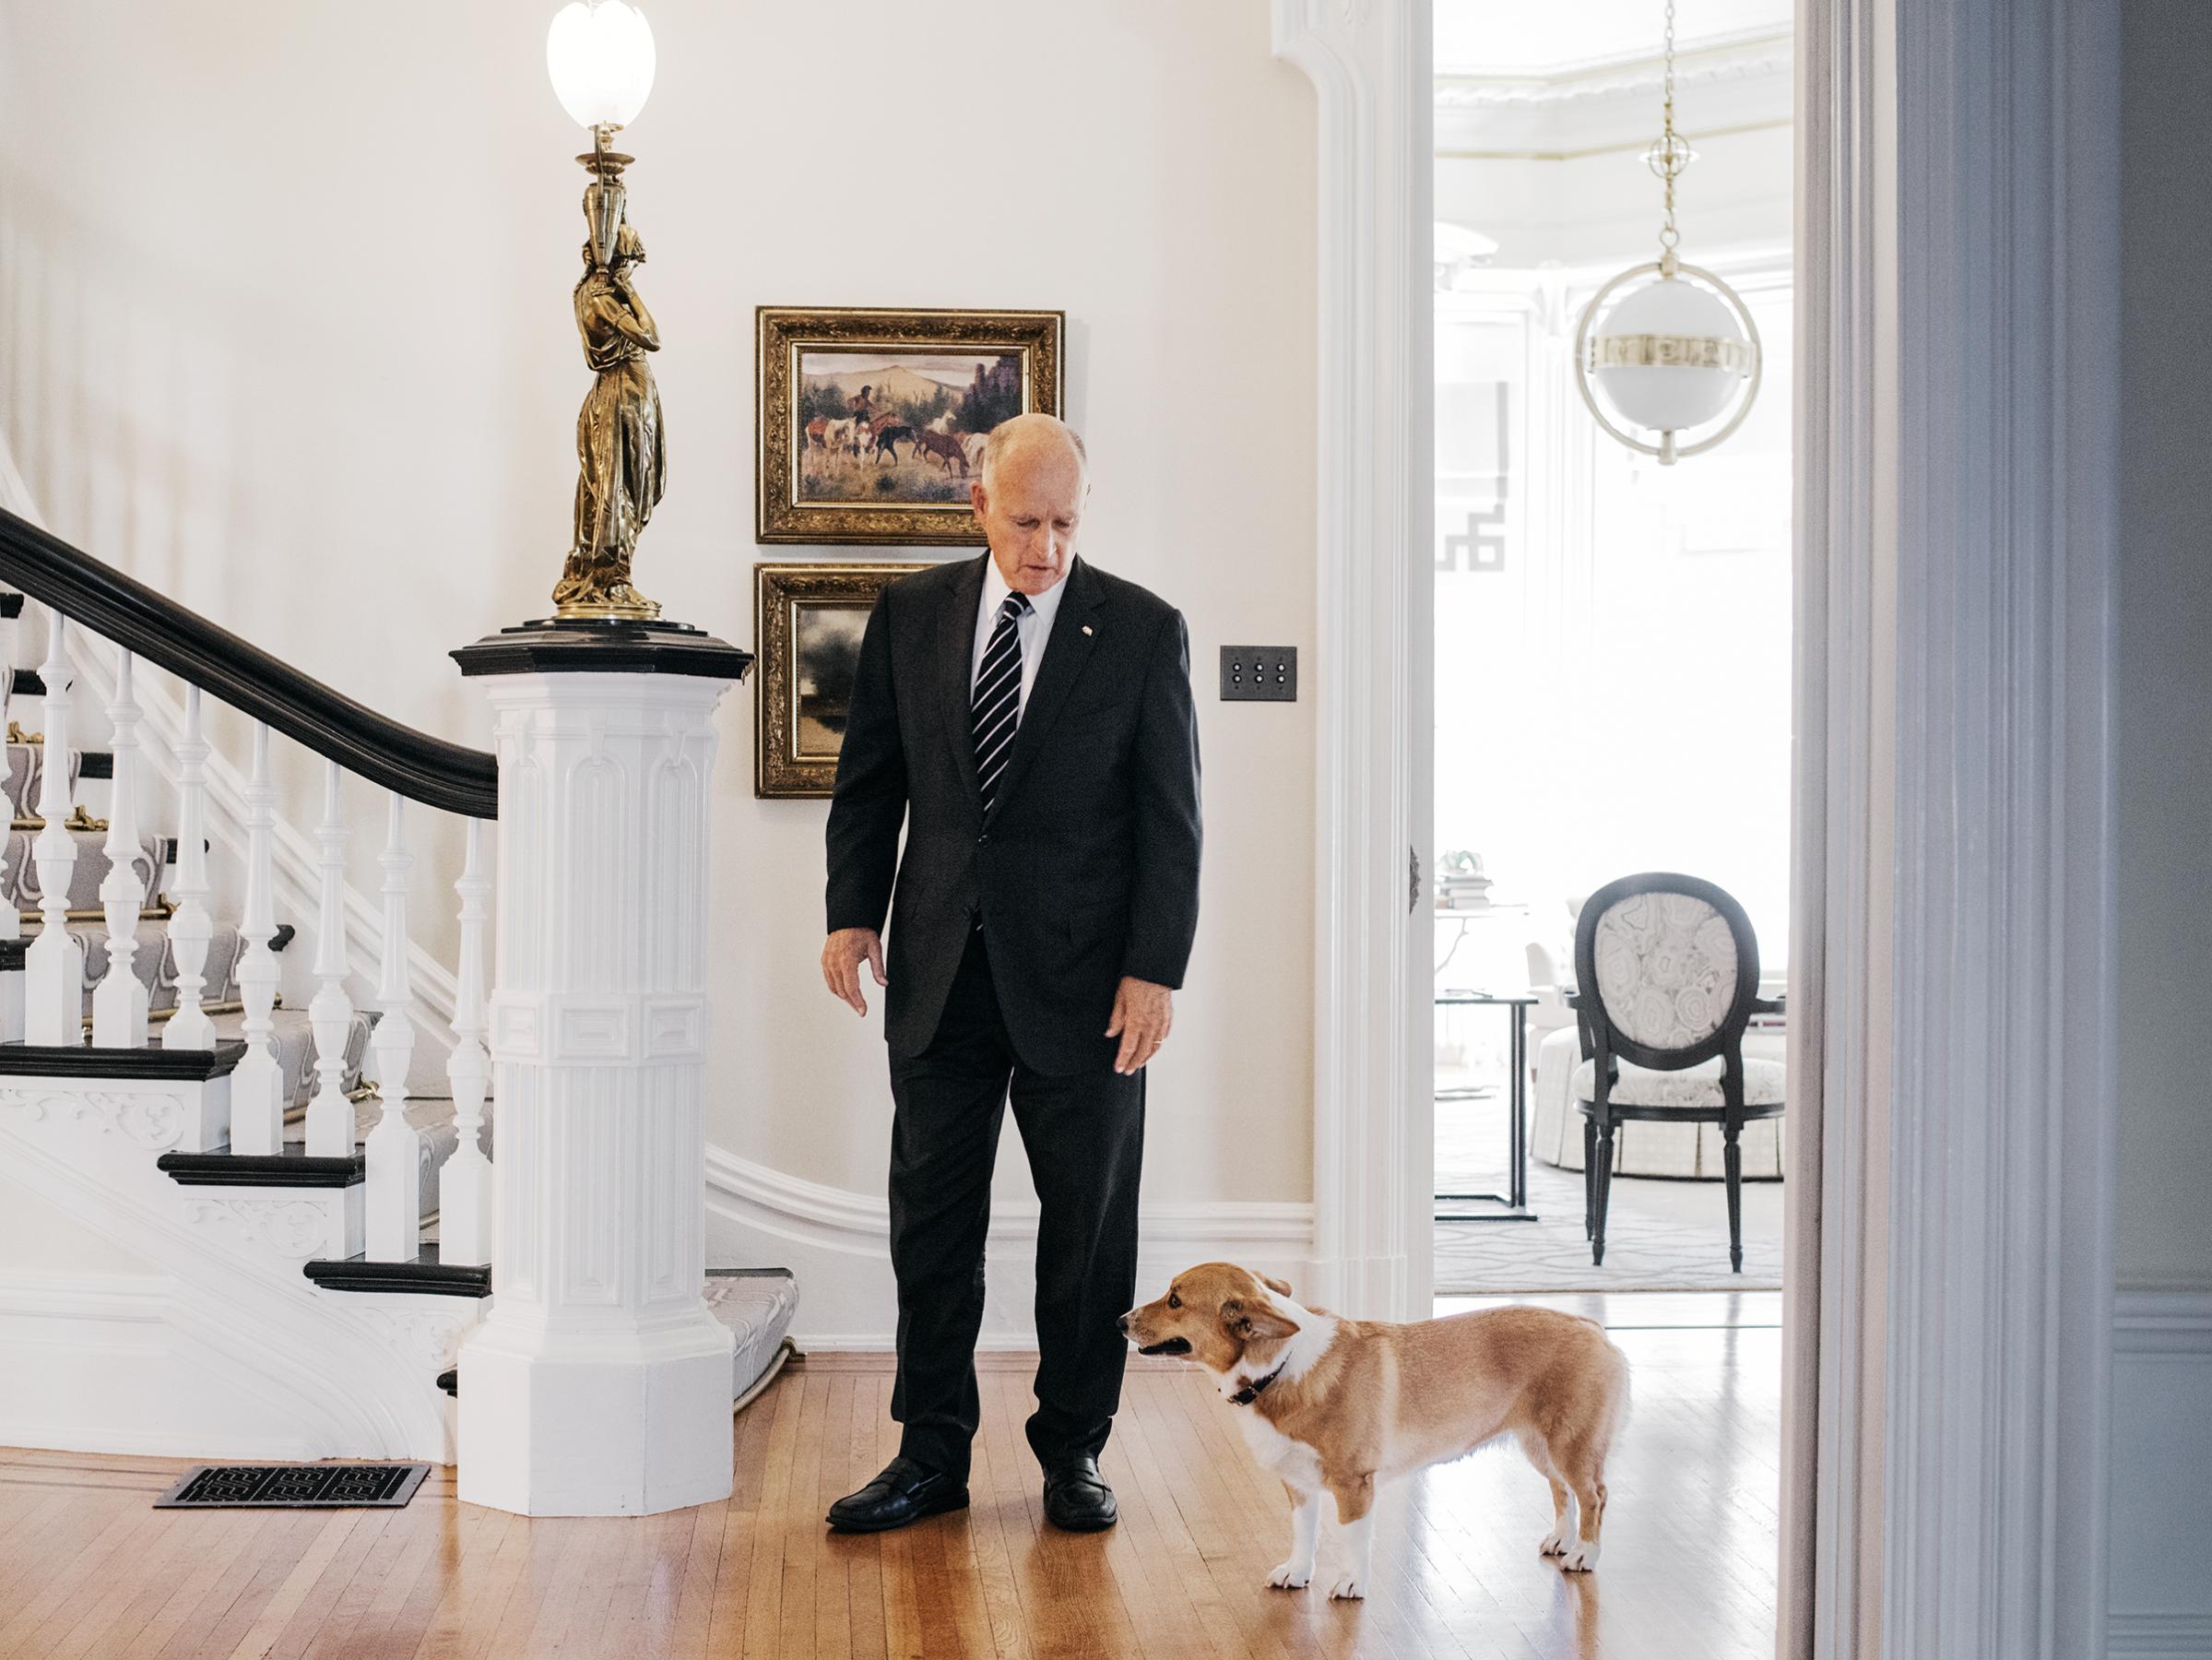 California Governor Jerry Brown, nearing the end of an unprecedented fourth term in office, stands in the governor’s mansion in Sacramento